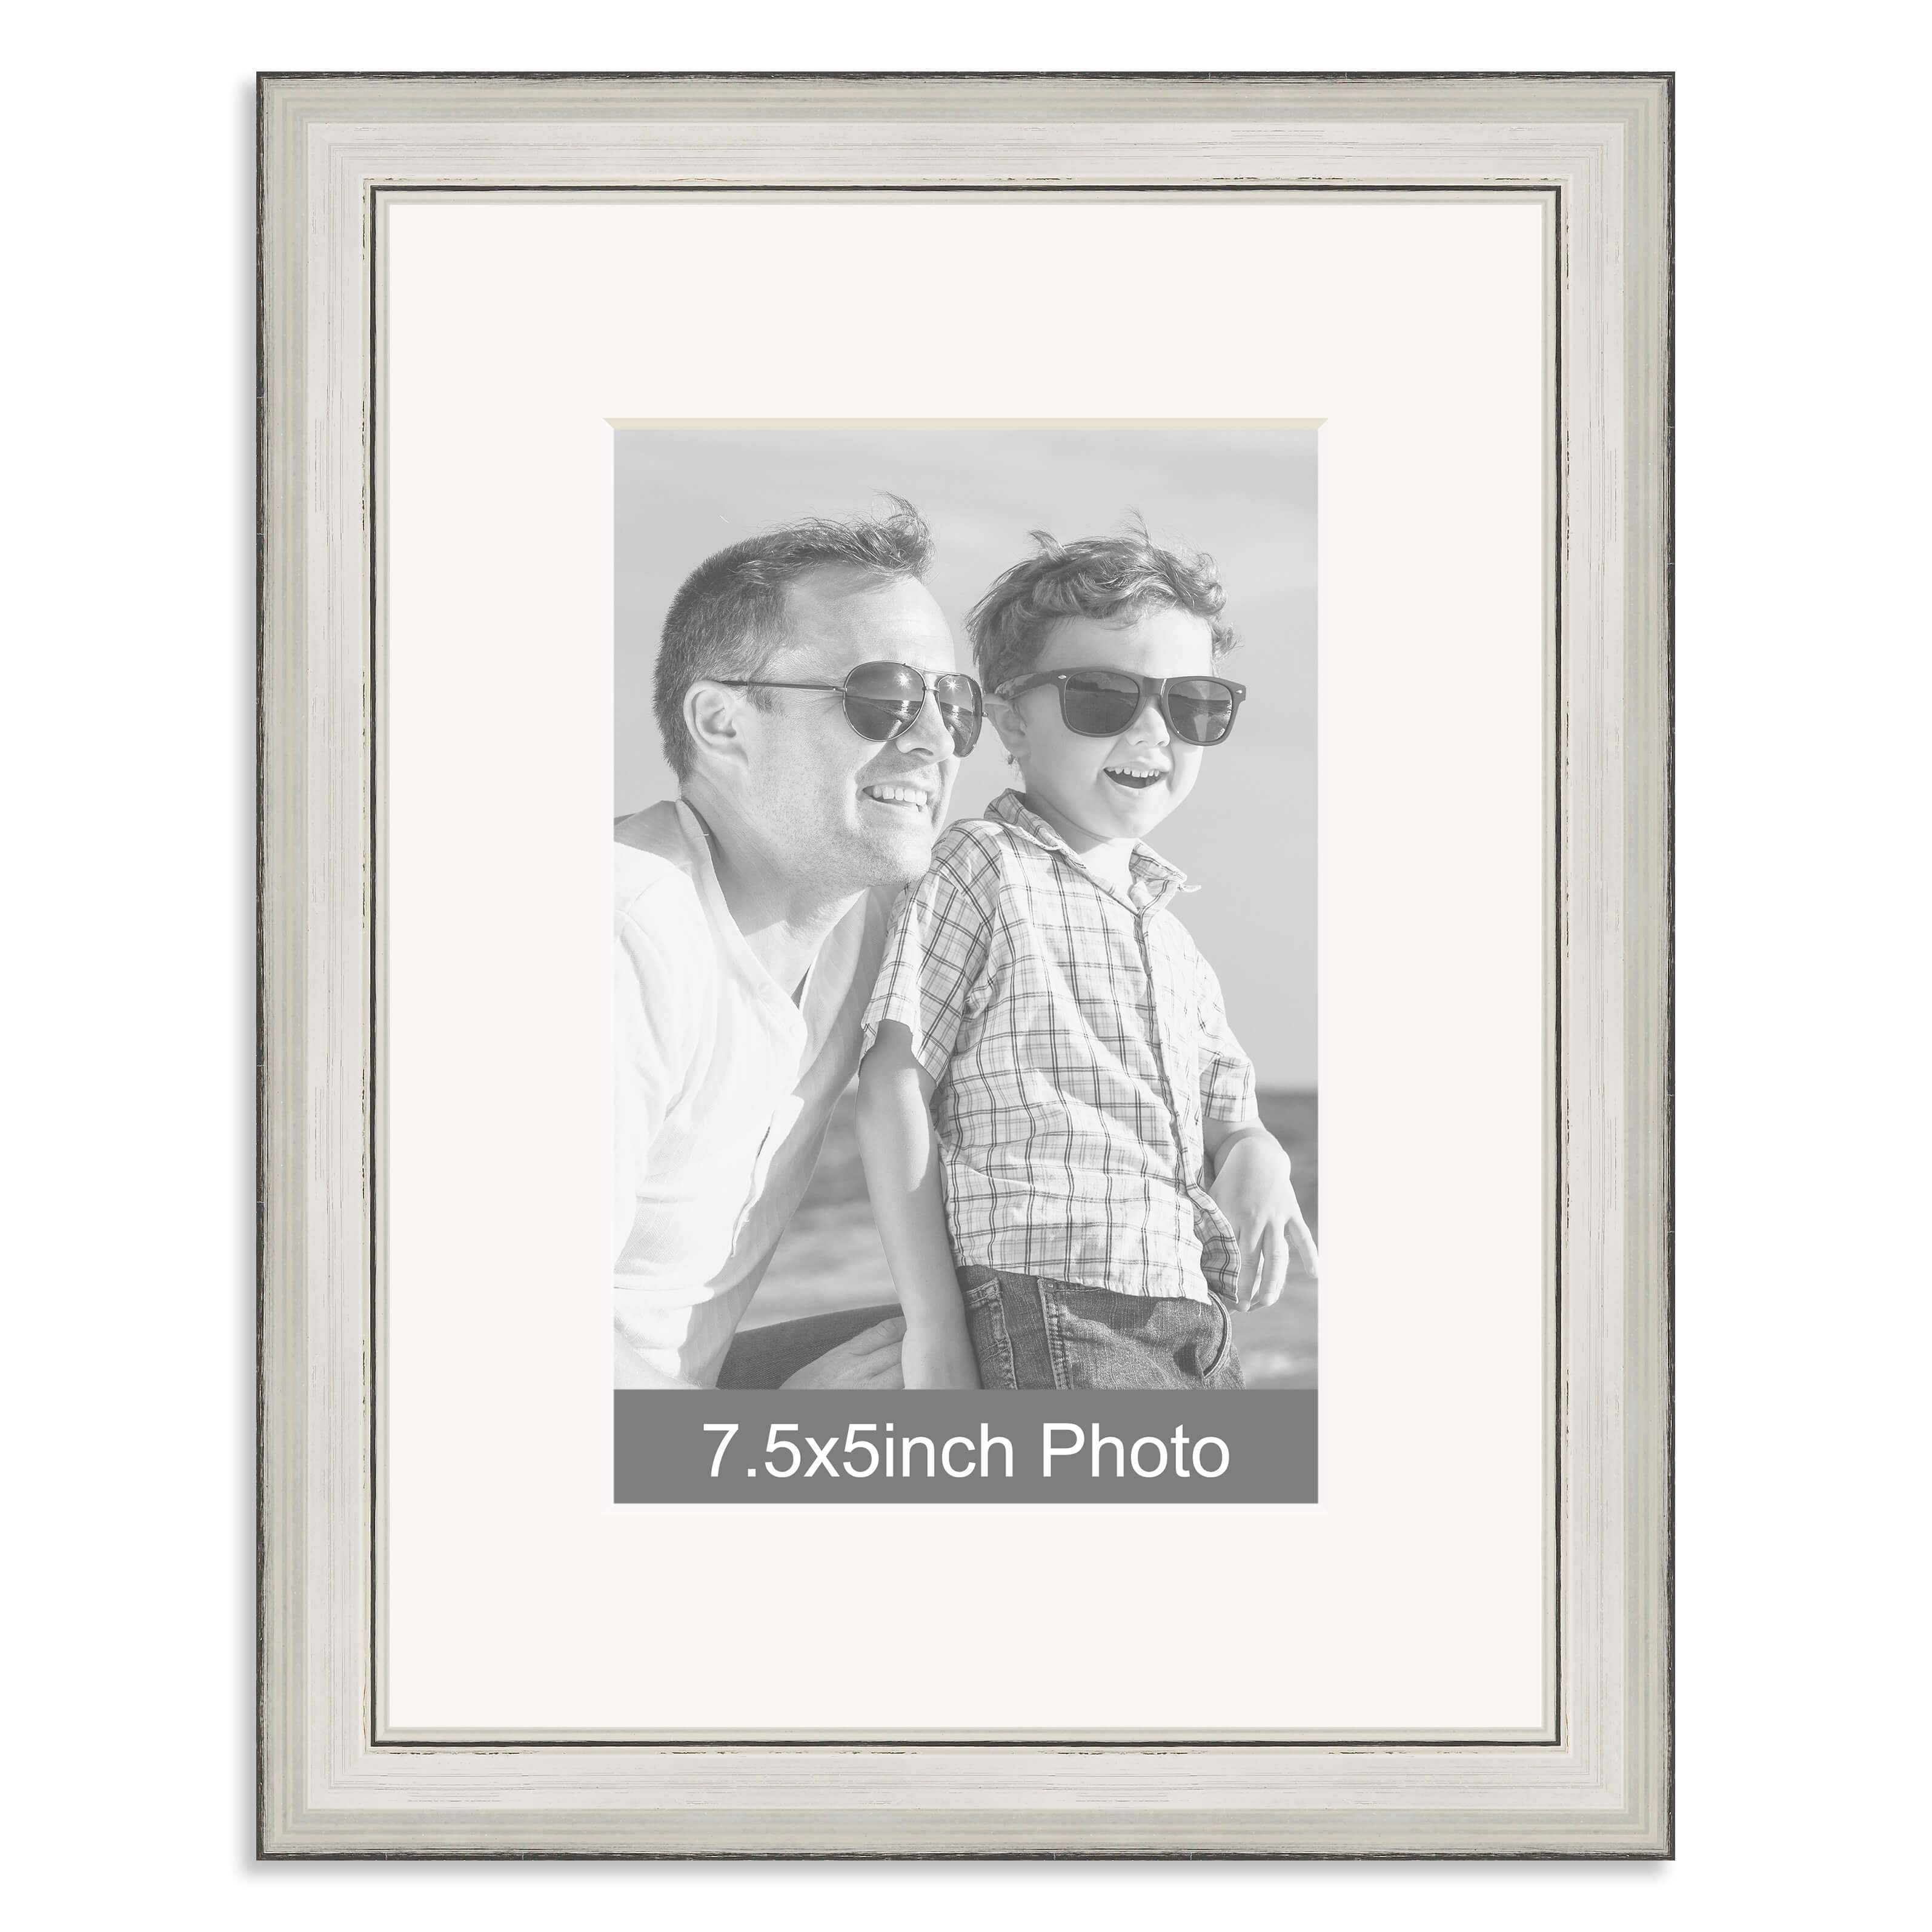 Silver Wooden Photo Frame with mount for a 7.5×5/5×7.5in Photo